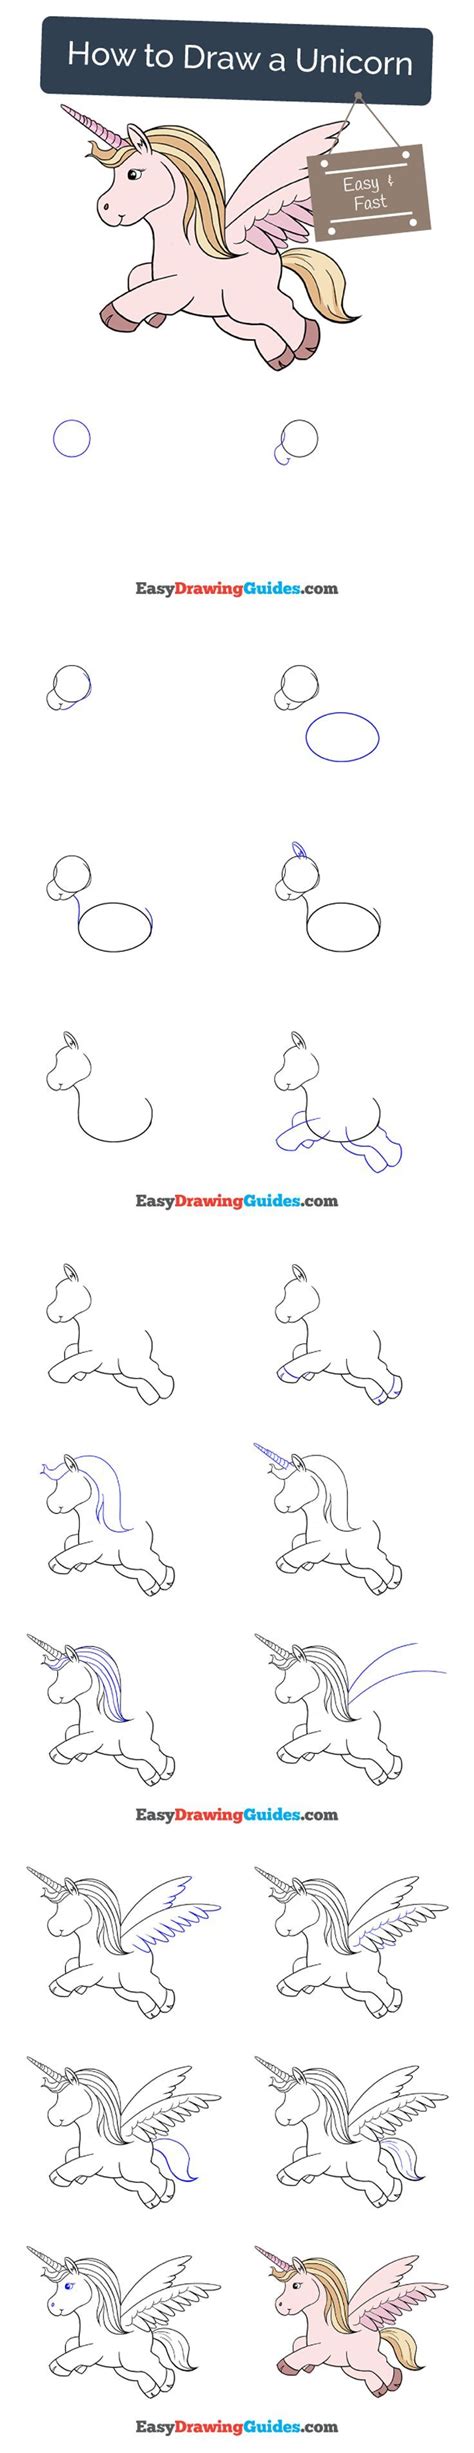 How to draw a mermaid and unicorn for kids mermaid and unicorn drawing and coloring pages. How to Draw a Unicorn in a Few Easy Steps | Unicorns, Drawings and Tutorials